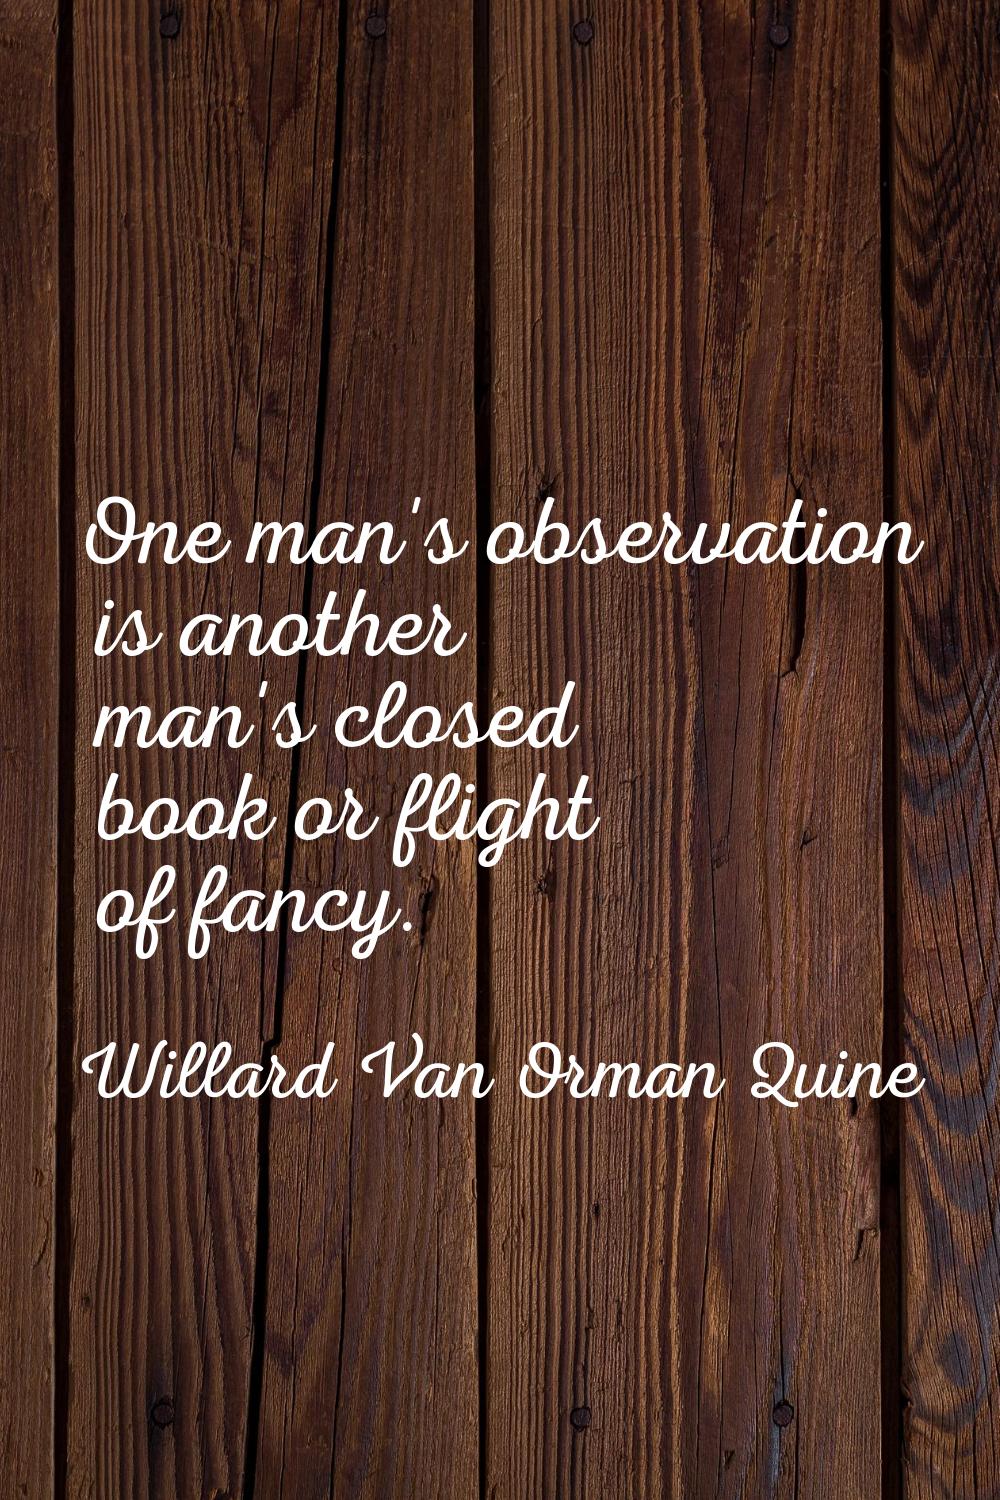 One man's observation is another man's closed book or flight of fancy.